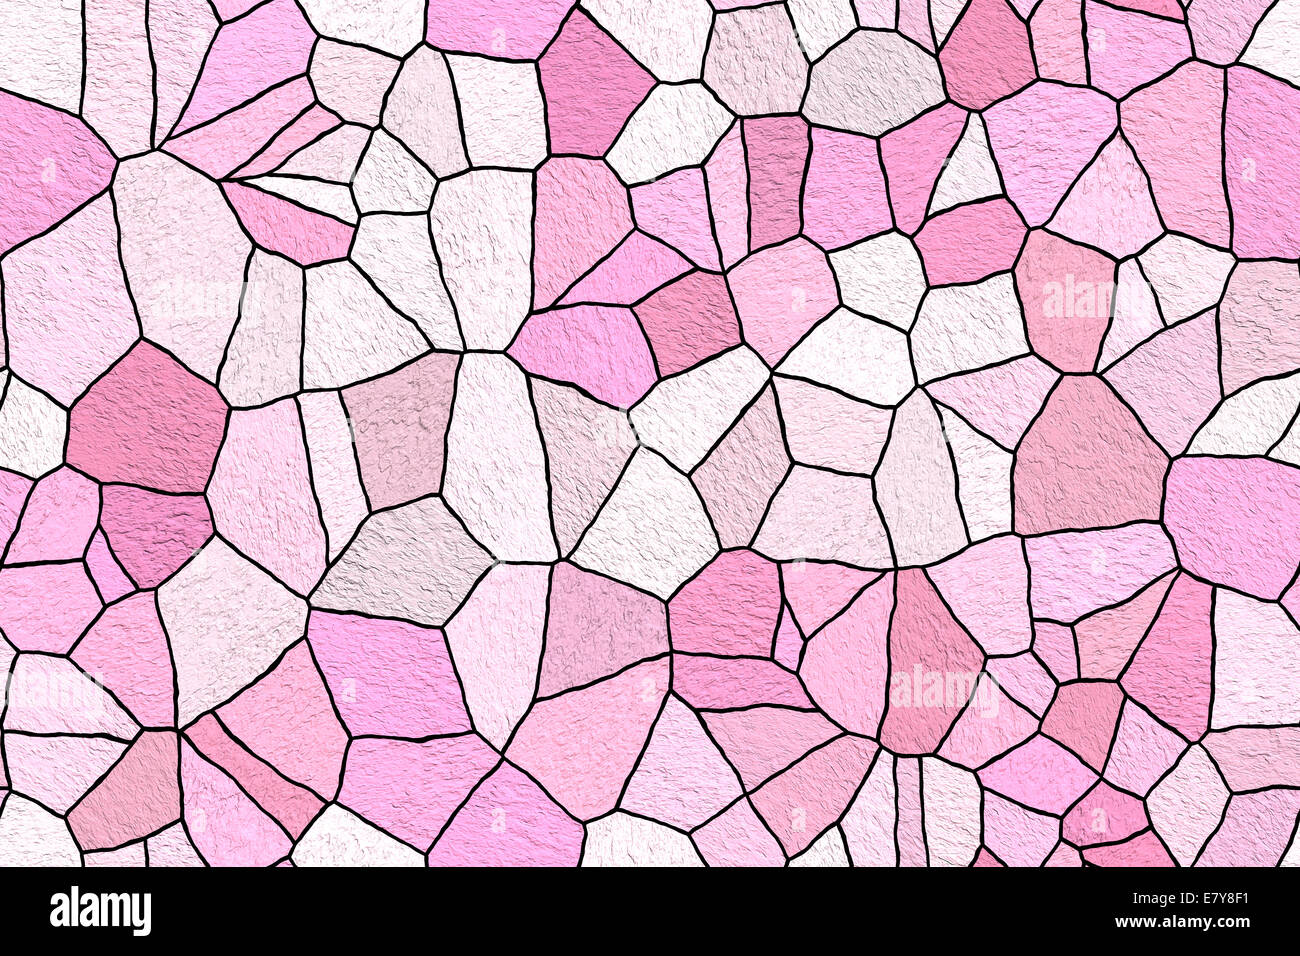 Raster illustration of a pastel pink crushed stained glass mosaic surface for use as a background Stock Photo